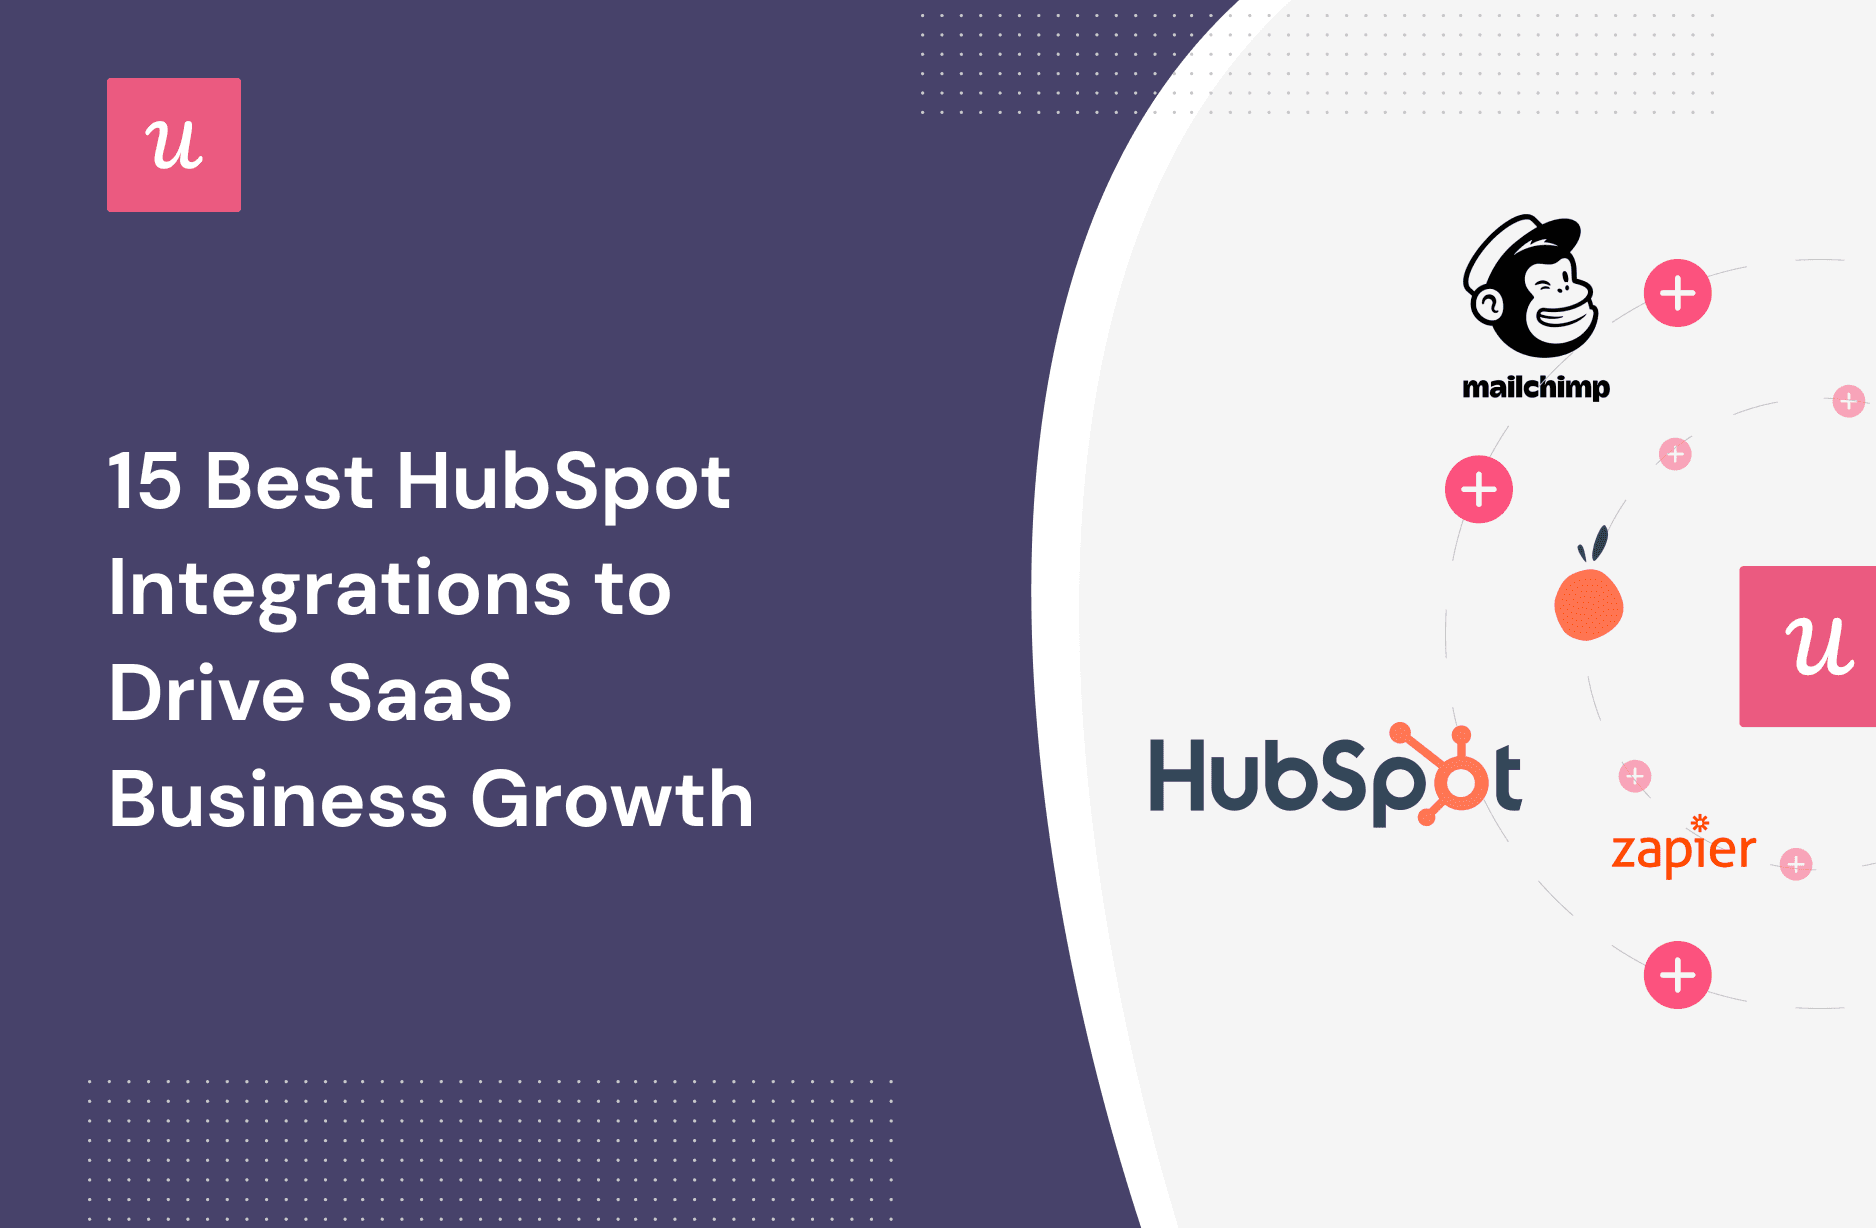 15 Best HubSpot Integrations to Drive SaaS Business Growth cover